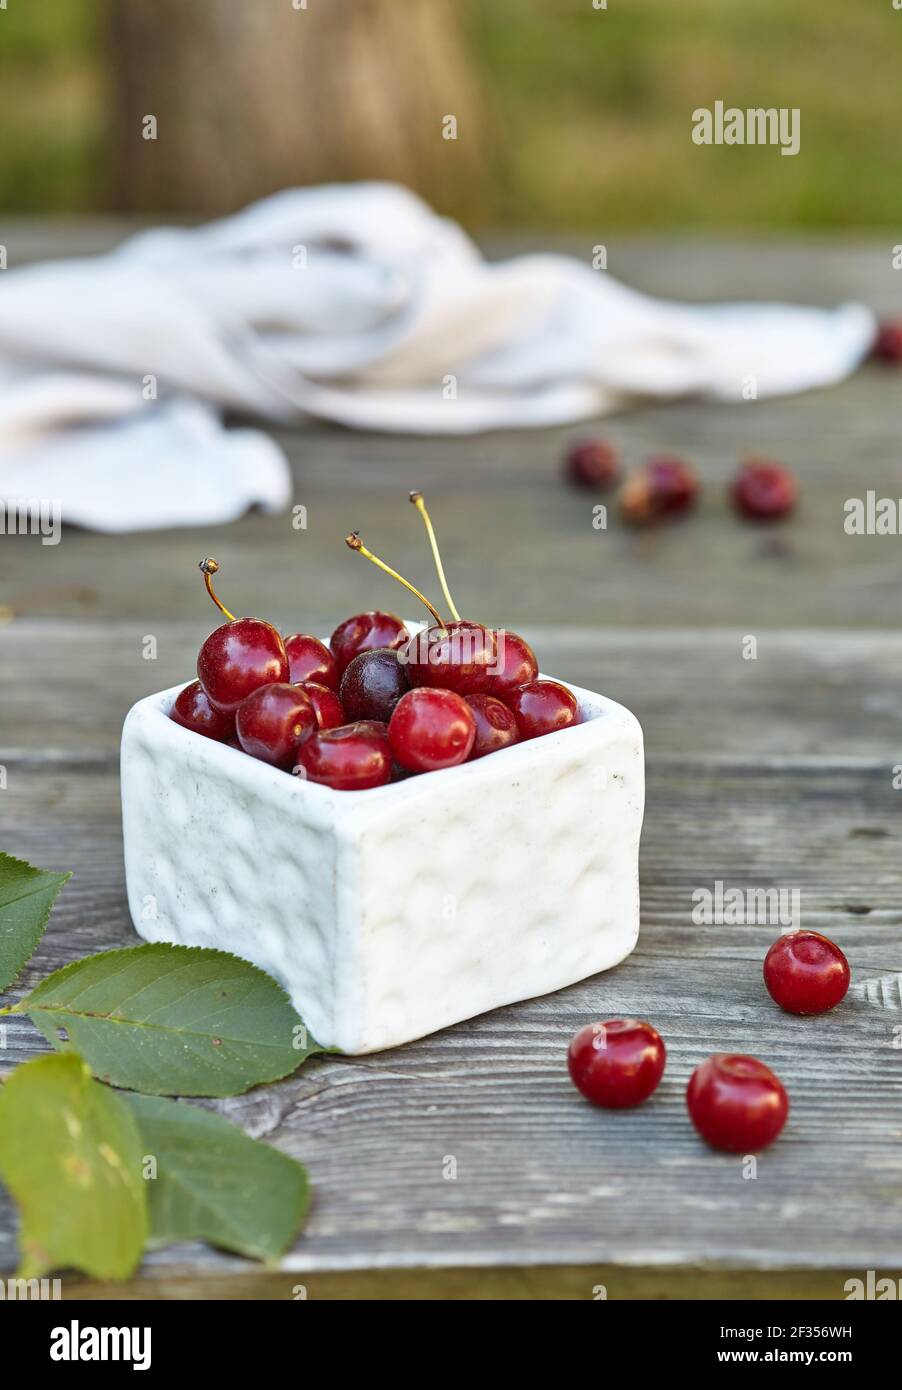 Cherry in a bowl on grey wooden old table. Ripe ripe cherries. Sweet red cherries. Stock Photo